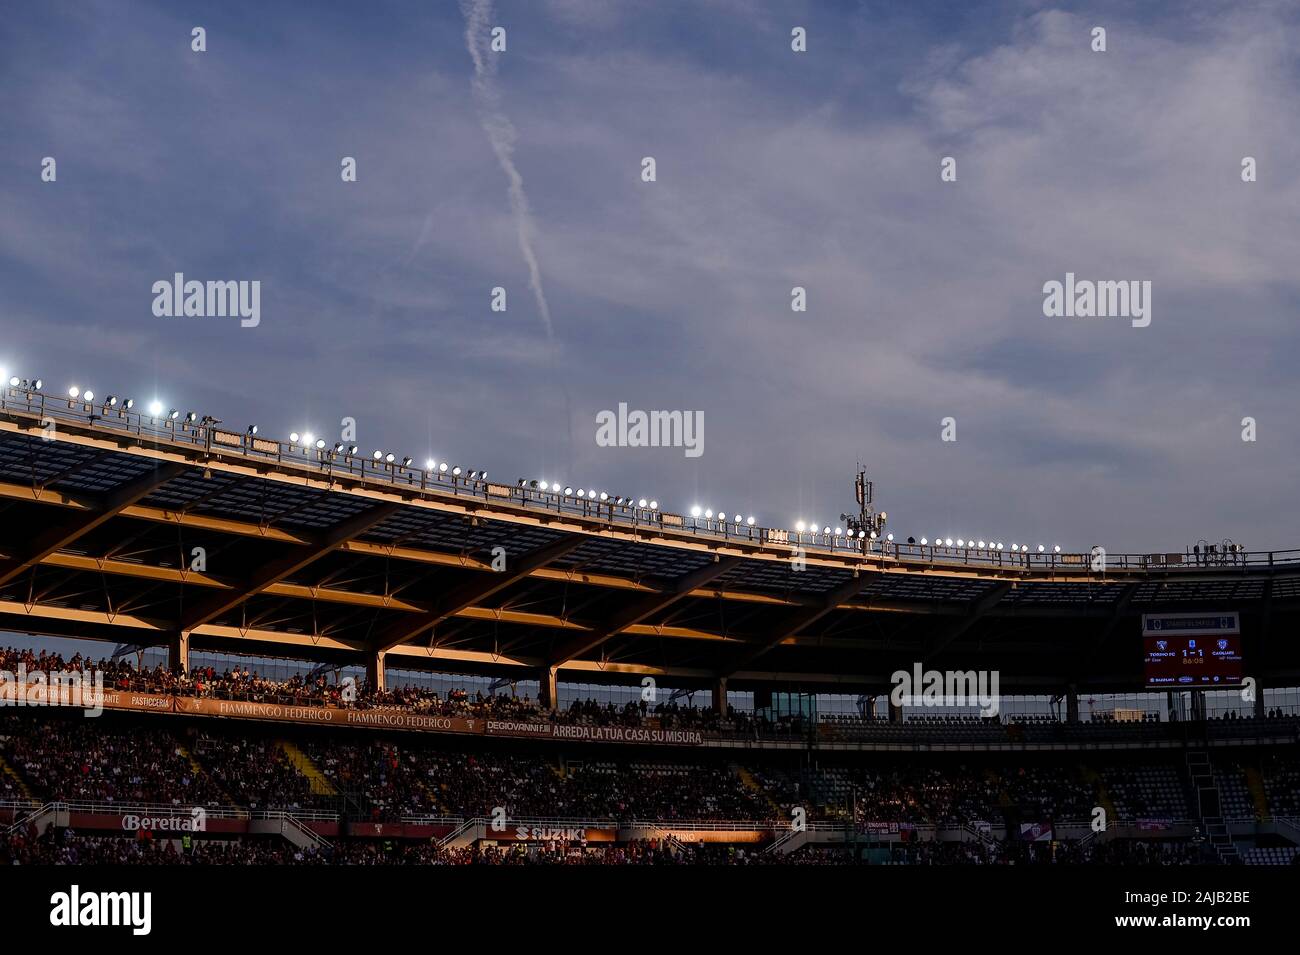 Turin, Italy - 27 October, 2019: Stadio Olimpico Grande Torino is pictured during the Serie A football match between Torino FC and Cagliari Calcio. The match ended in a 1-1 tie. Credit: Nicolò Campo/Alamy Live News Stock Photo